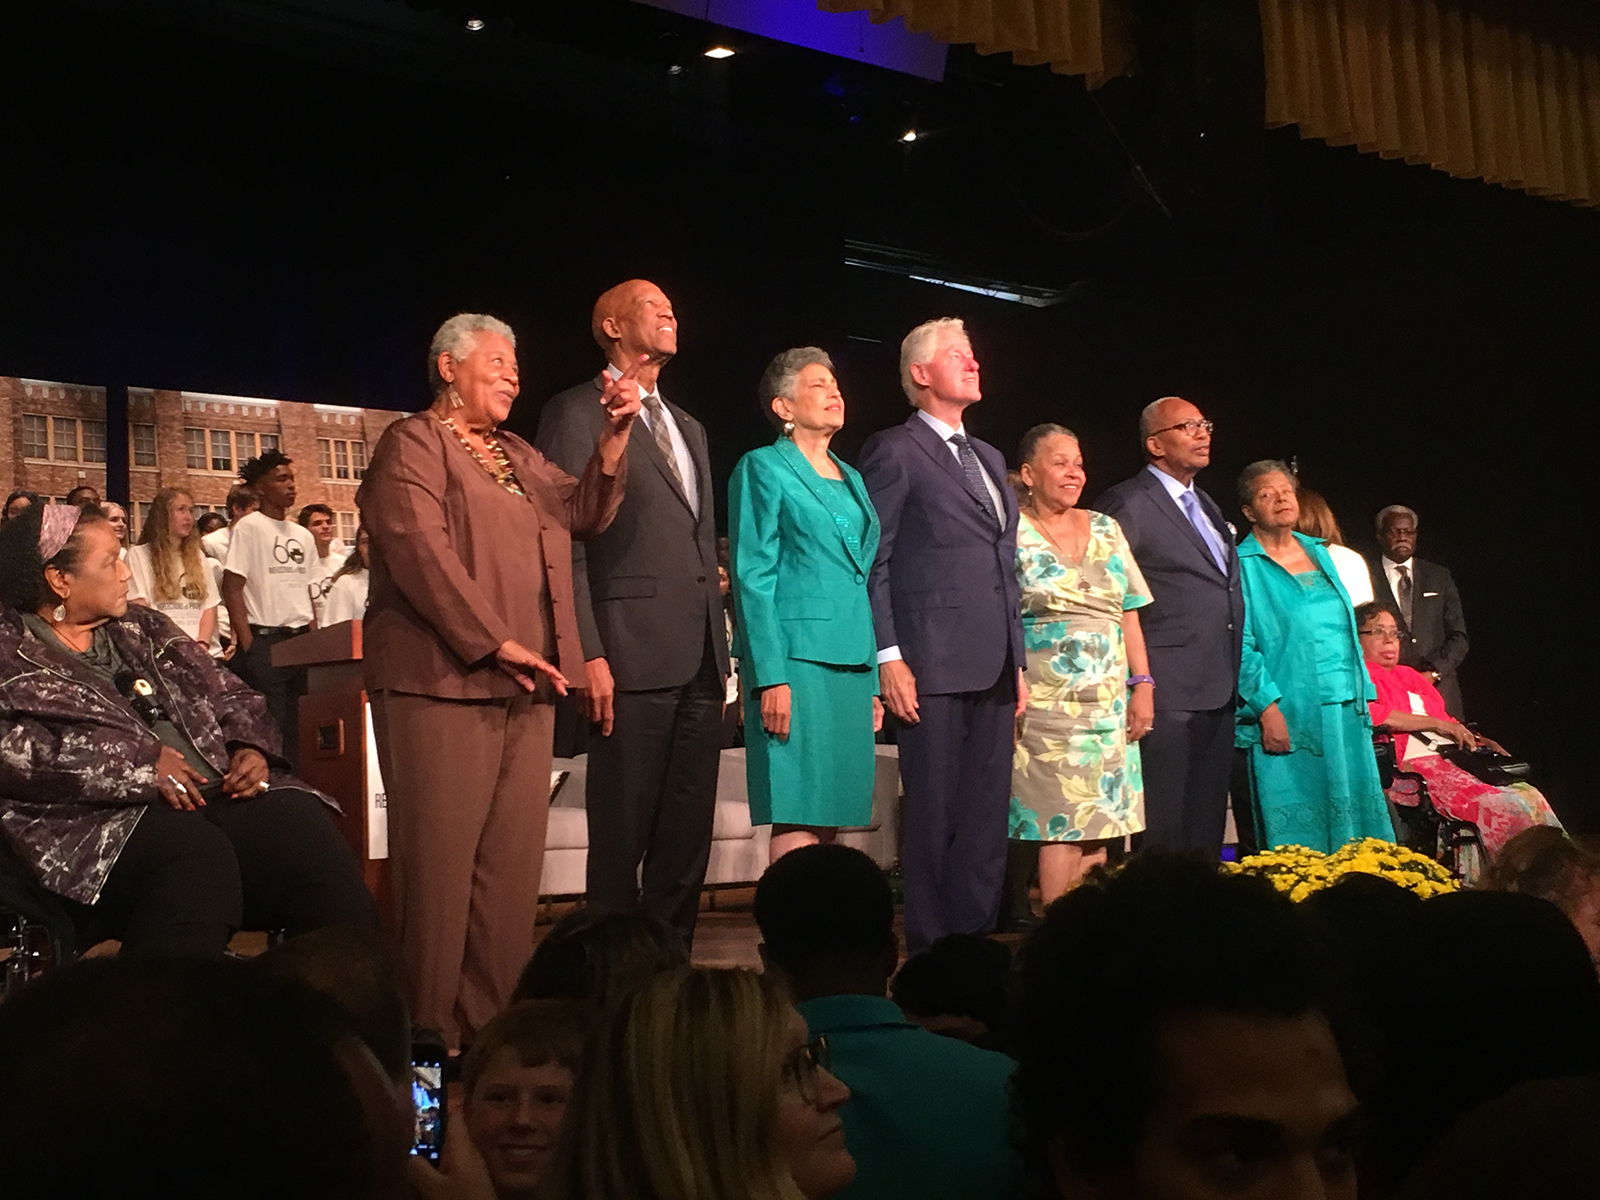 Surviving members of the Little Rock Nine stand with former President Bill Clinton at Little Rock Central High School for the 60th anniversary of the school’s desegregation in 2017. Left to right: Melba Pattillo Beals, Minnijean Brown-Trickey, Terrence Roberts, Carlotta Walls LaNier, Clinton, Gloria Ray Karlmark, Ernest Green, Elizabeth Eckford and Thelma Mothershed-Wair.